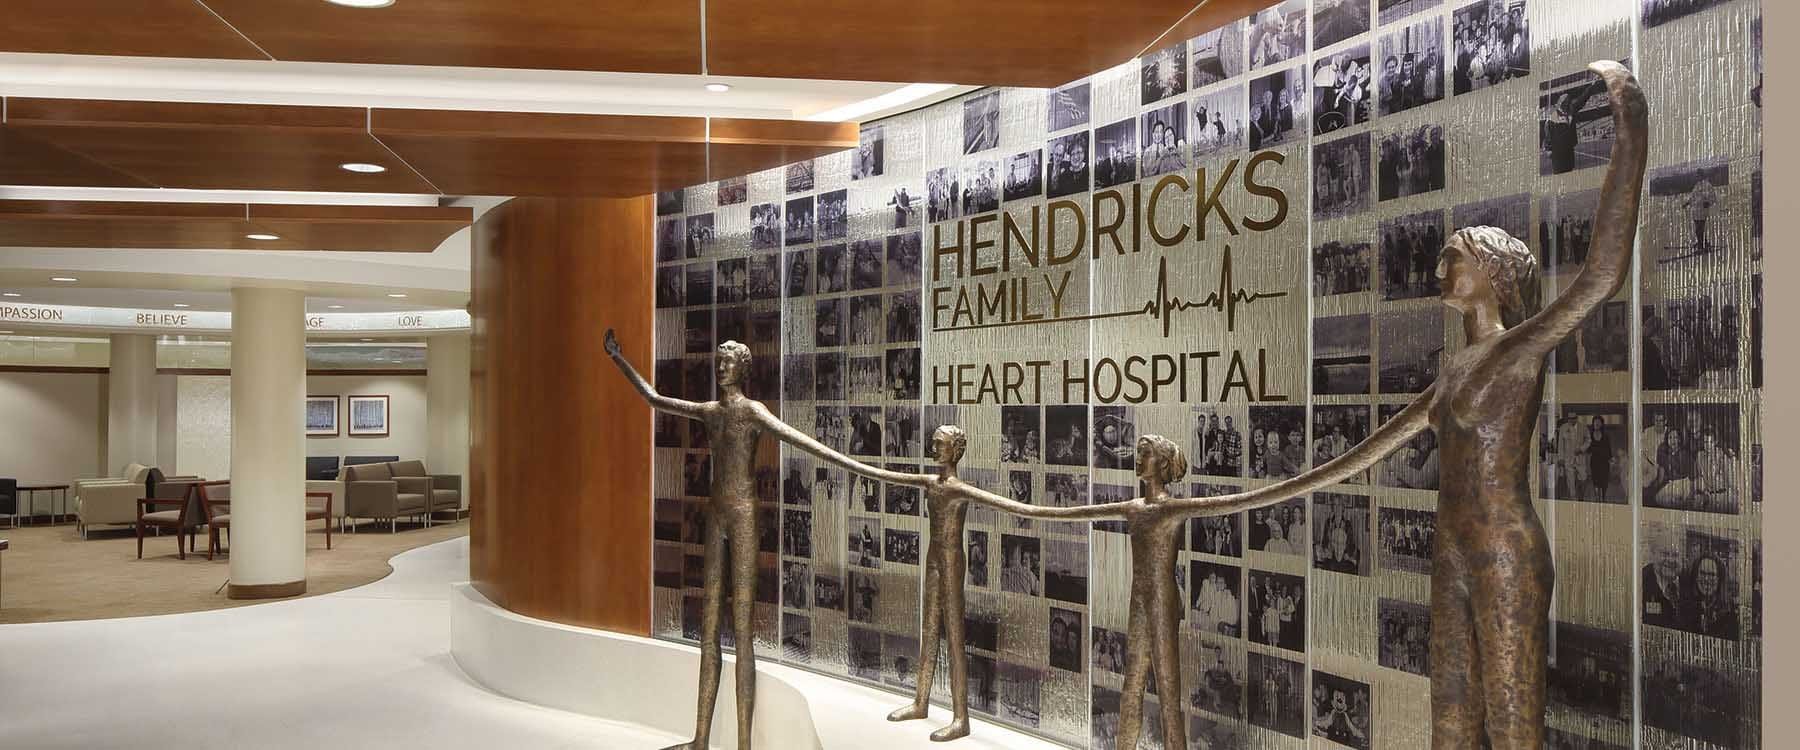 Beloit Health System Hendricks Heart Hospital includes art and texture to suggest brand identify